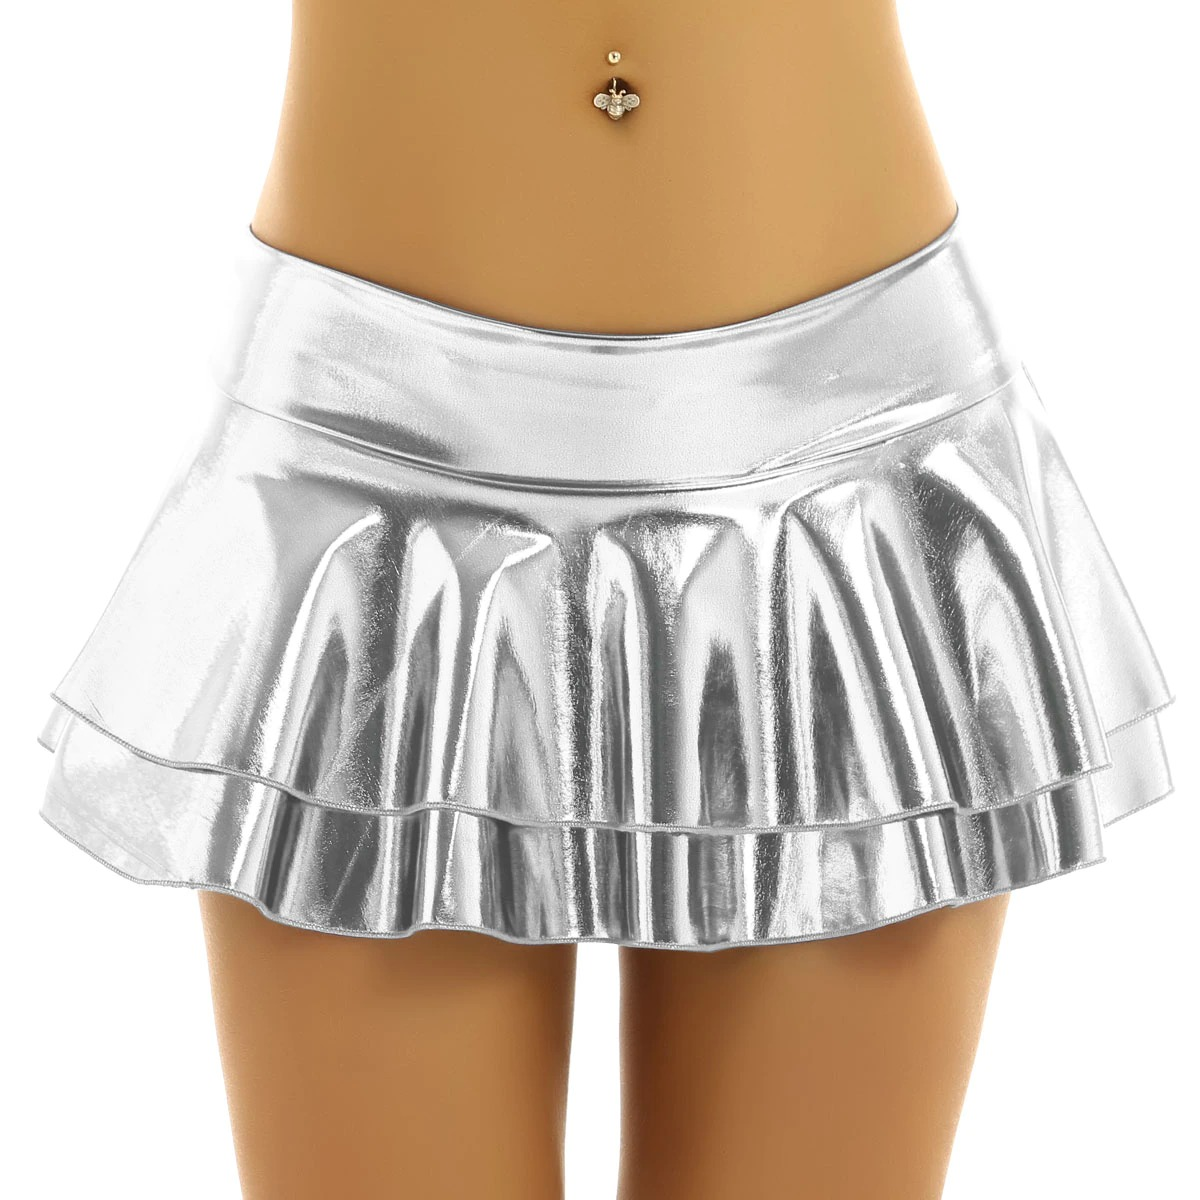 Ladies Sexy Mini Skirt with Low Rise / Fashion Shiny Skirt with Wide Waistband - EVE's SECRETS